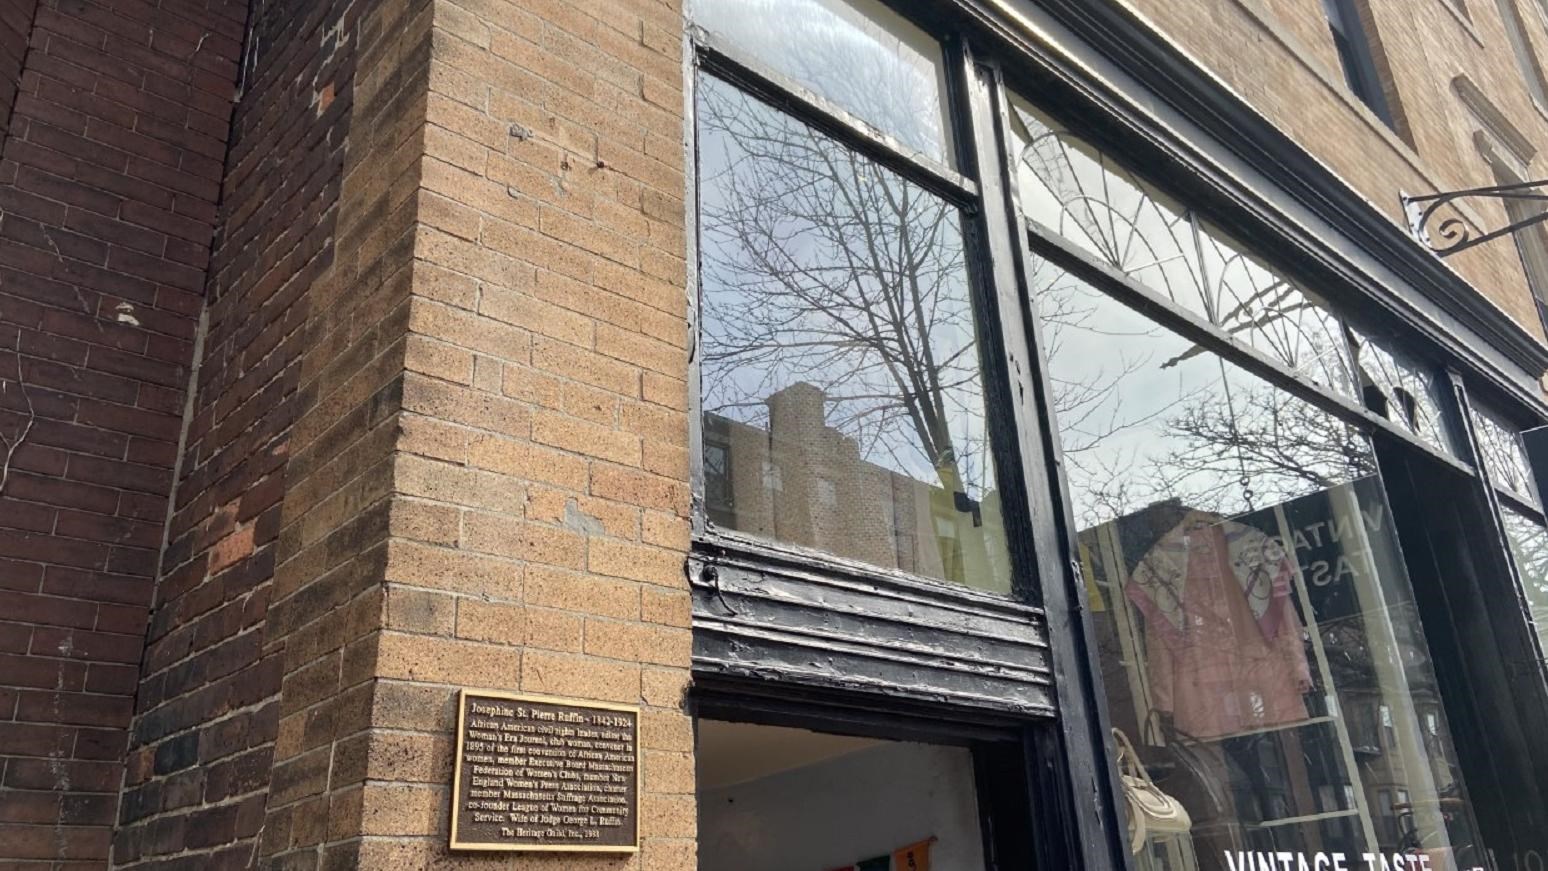 Charles Street brick townhouse with historical plaque and large window storefront.